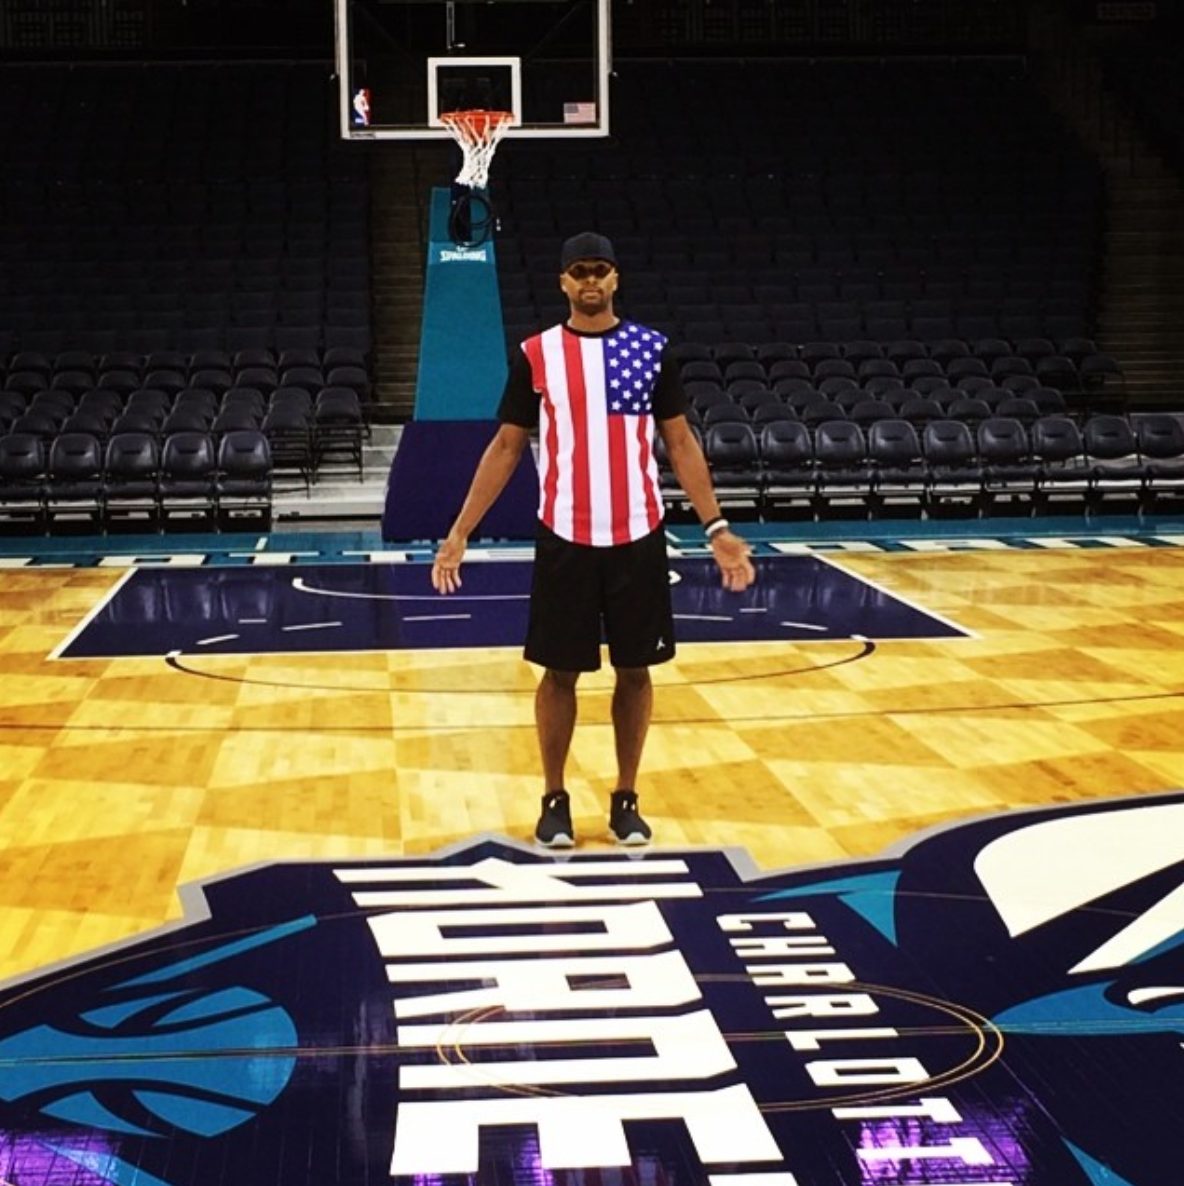 Charlotte Hornets creates a “Buzz” with New Floor Design